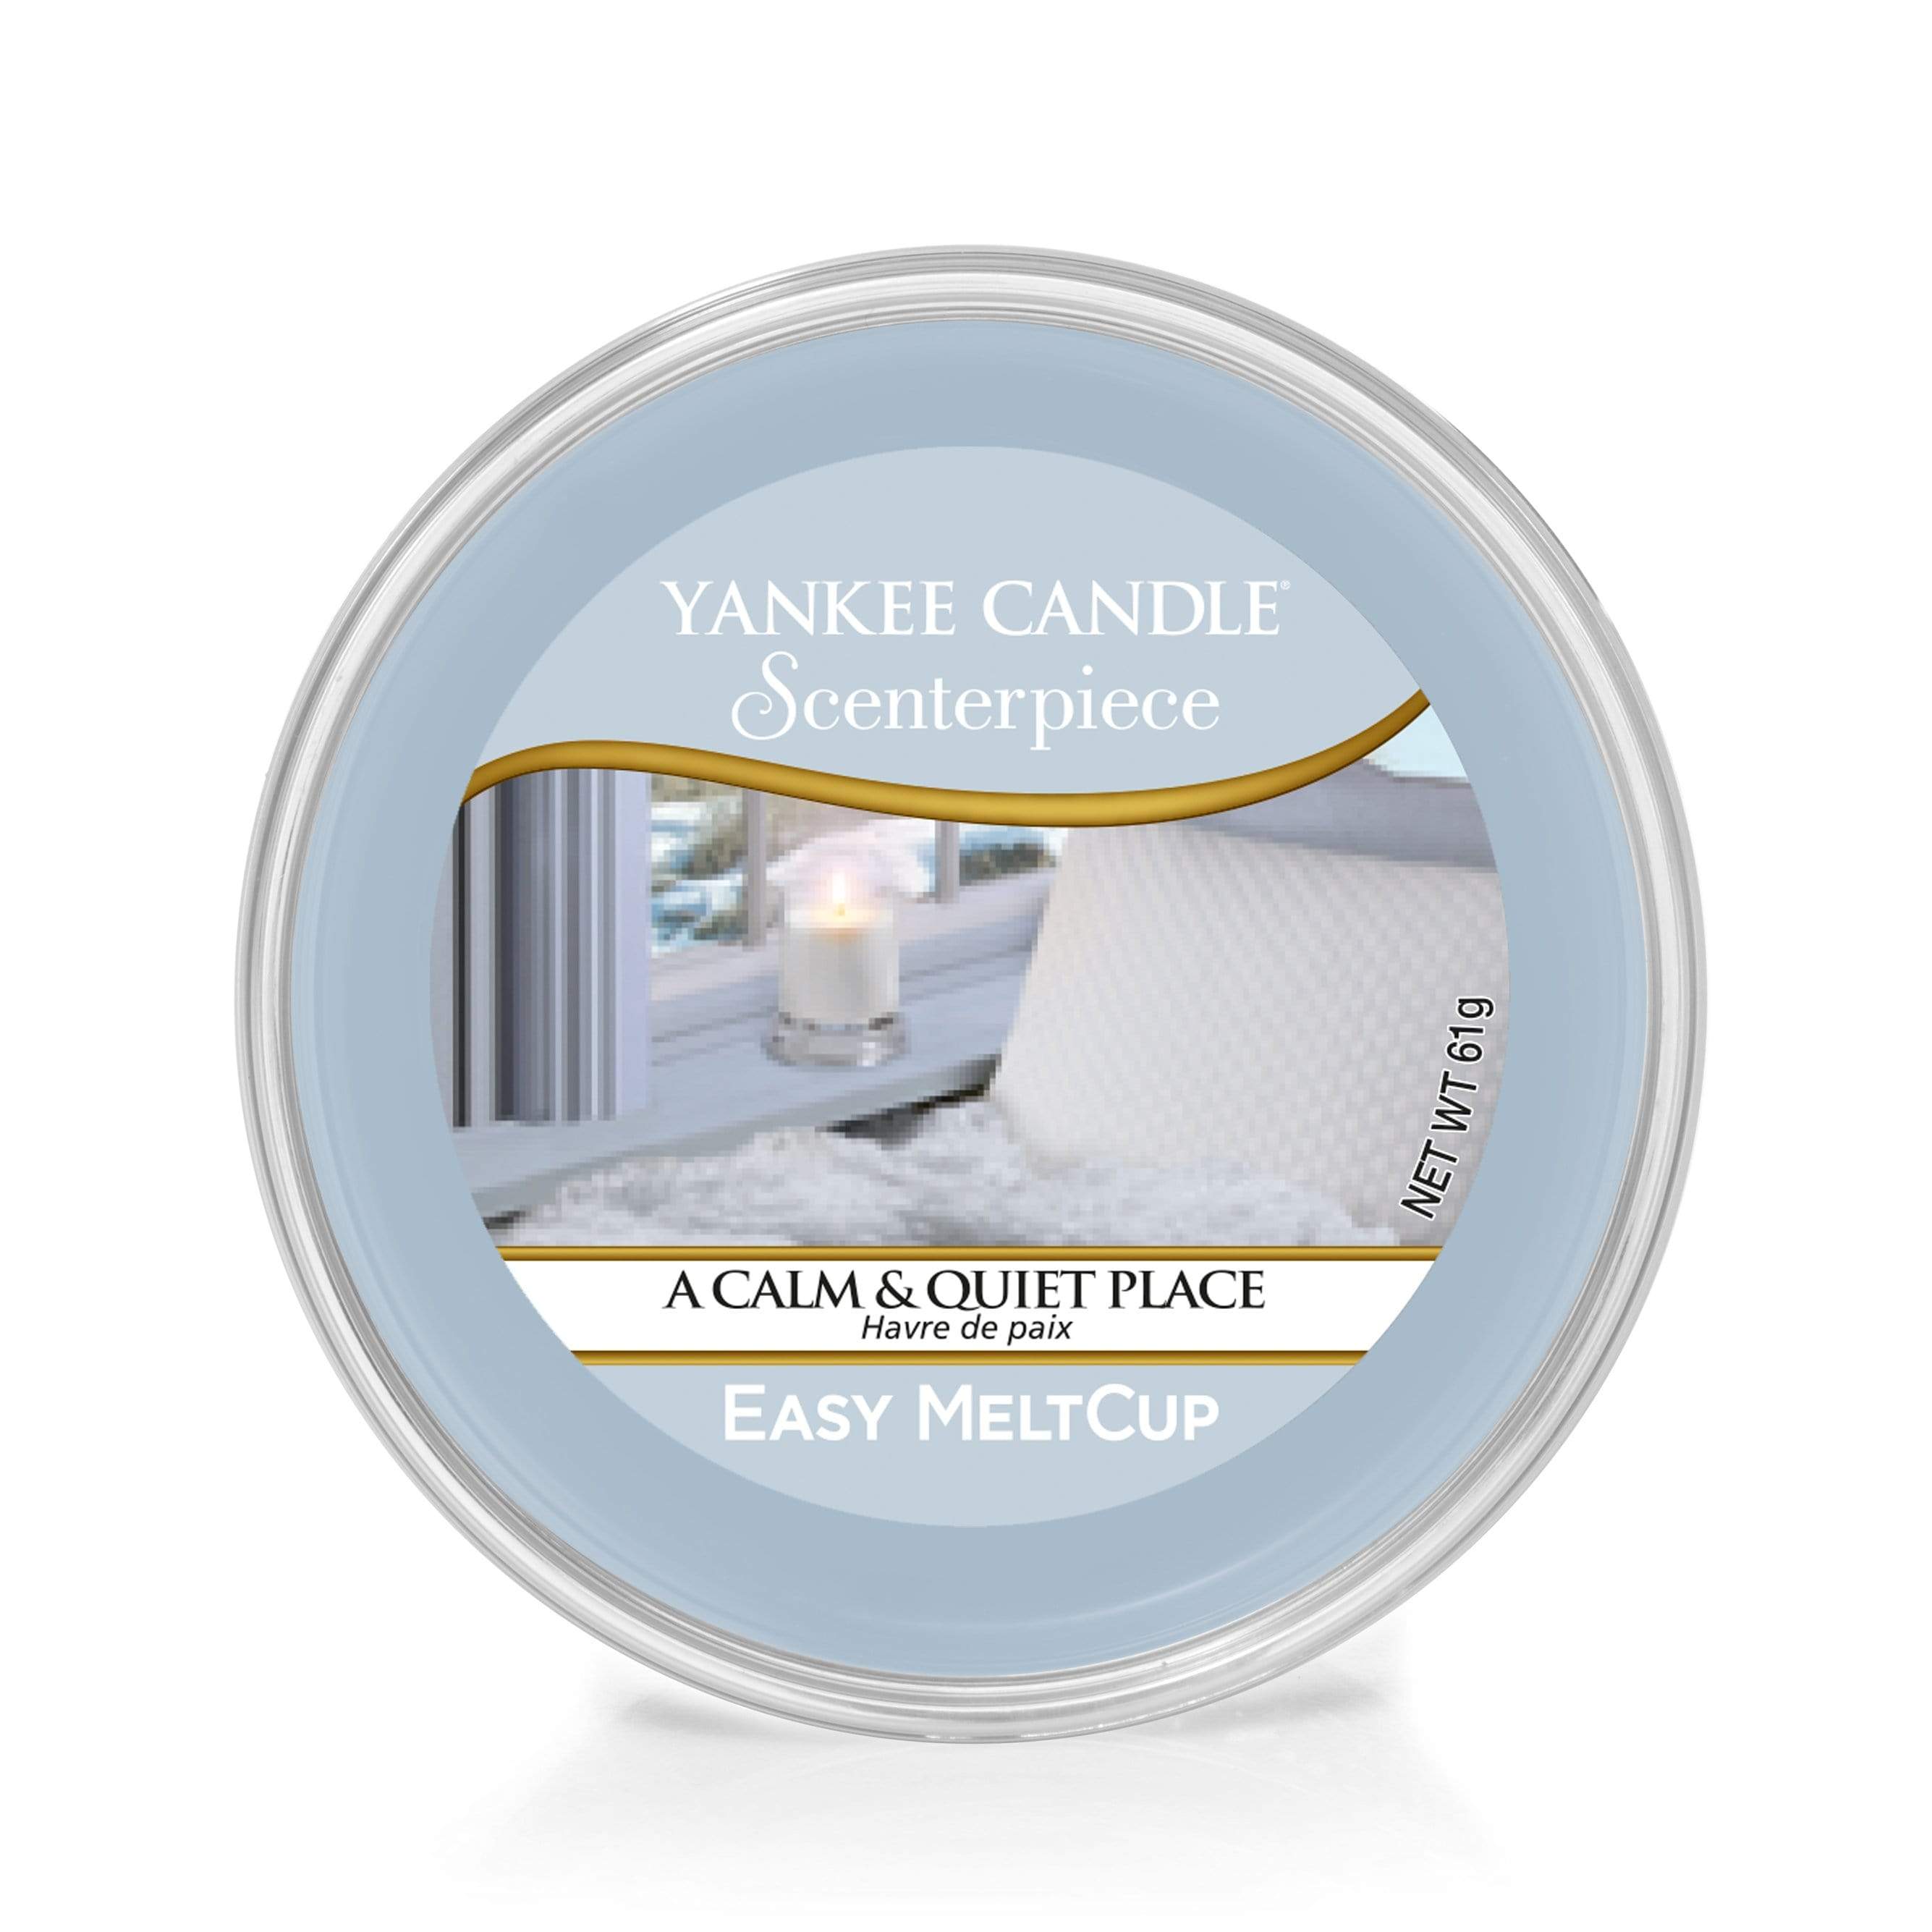 Yankee Candle Melt Cup Yankee Candle Scenterpiece Melt Cup - A Calm & Quiet Place